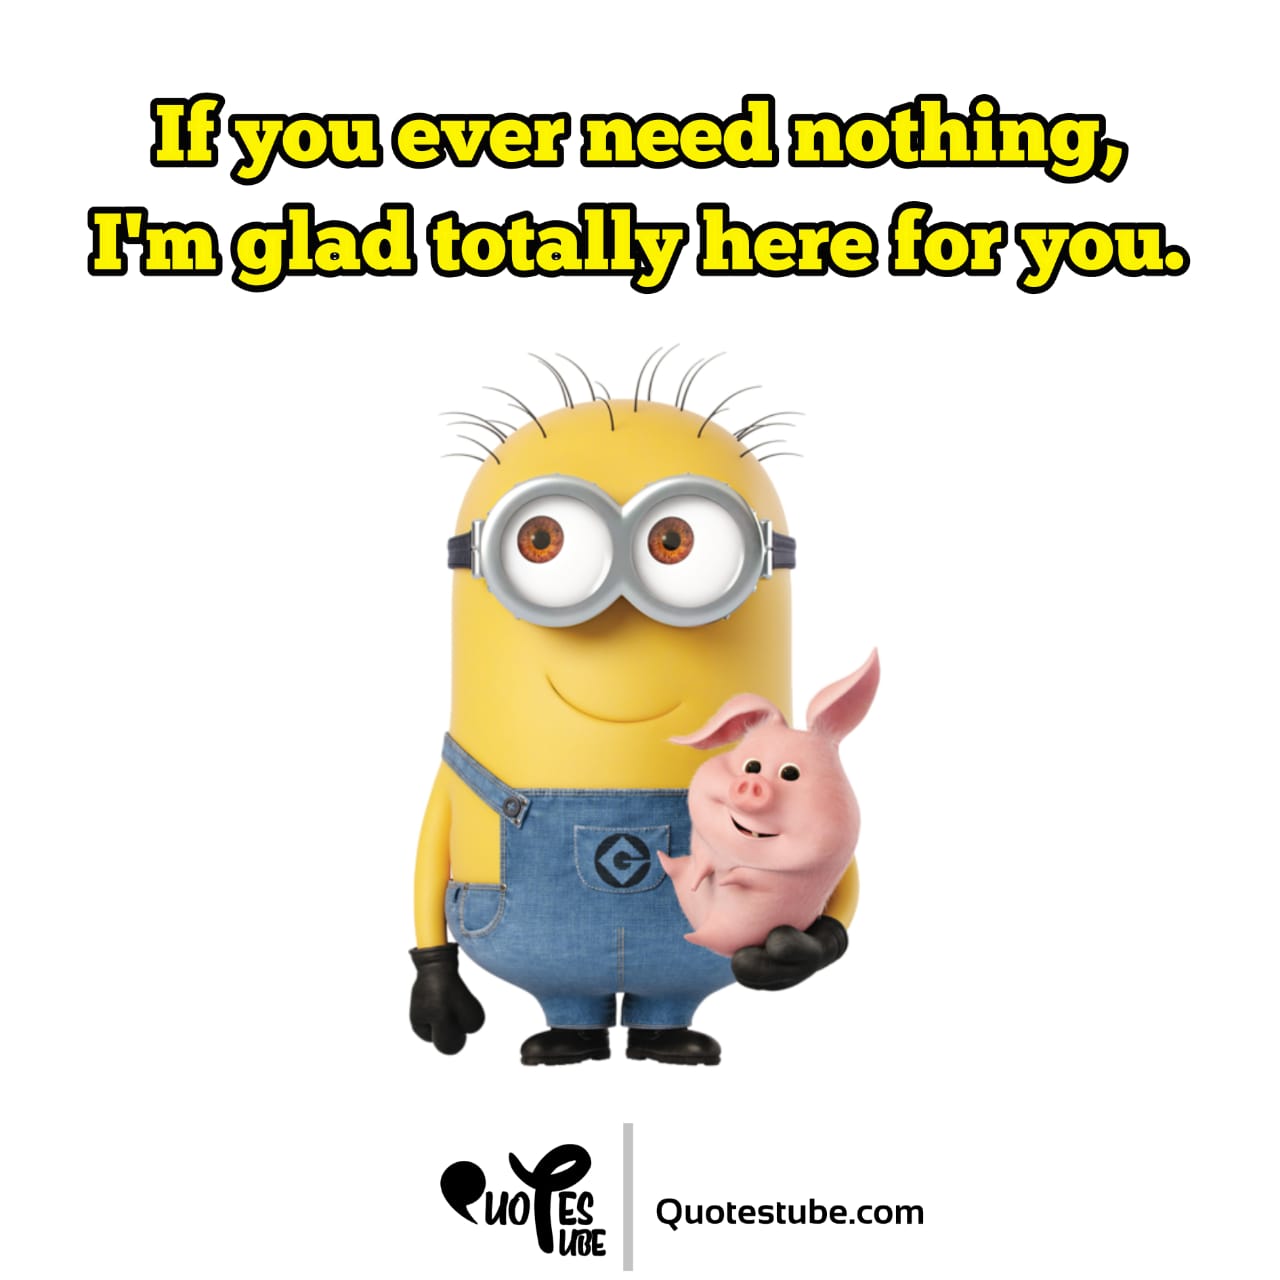 Famous Minion Quotes From The Movie – Quotes Tube